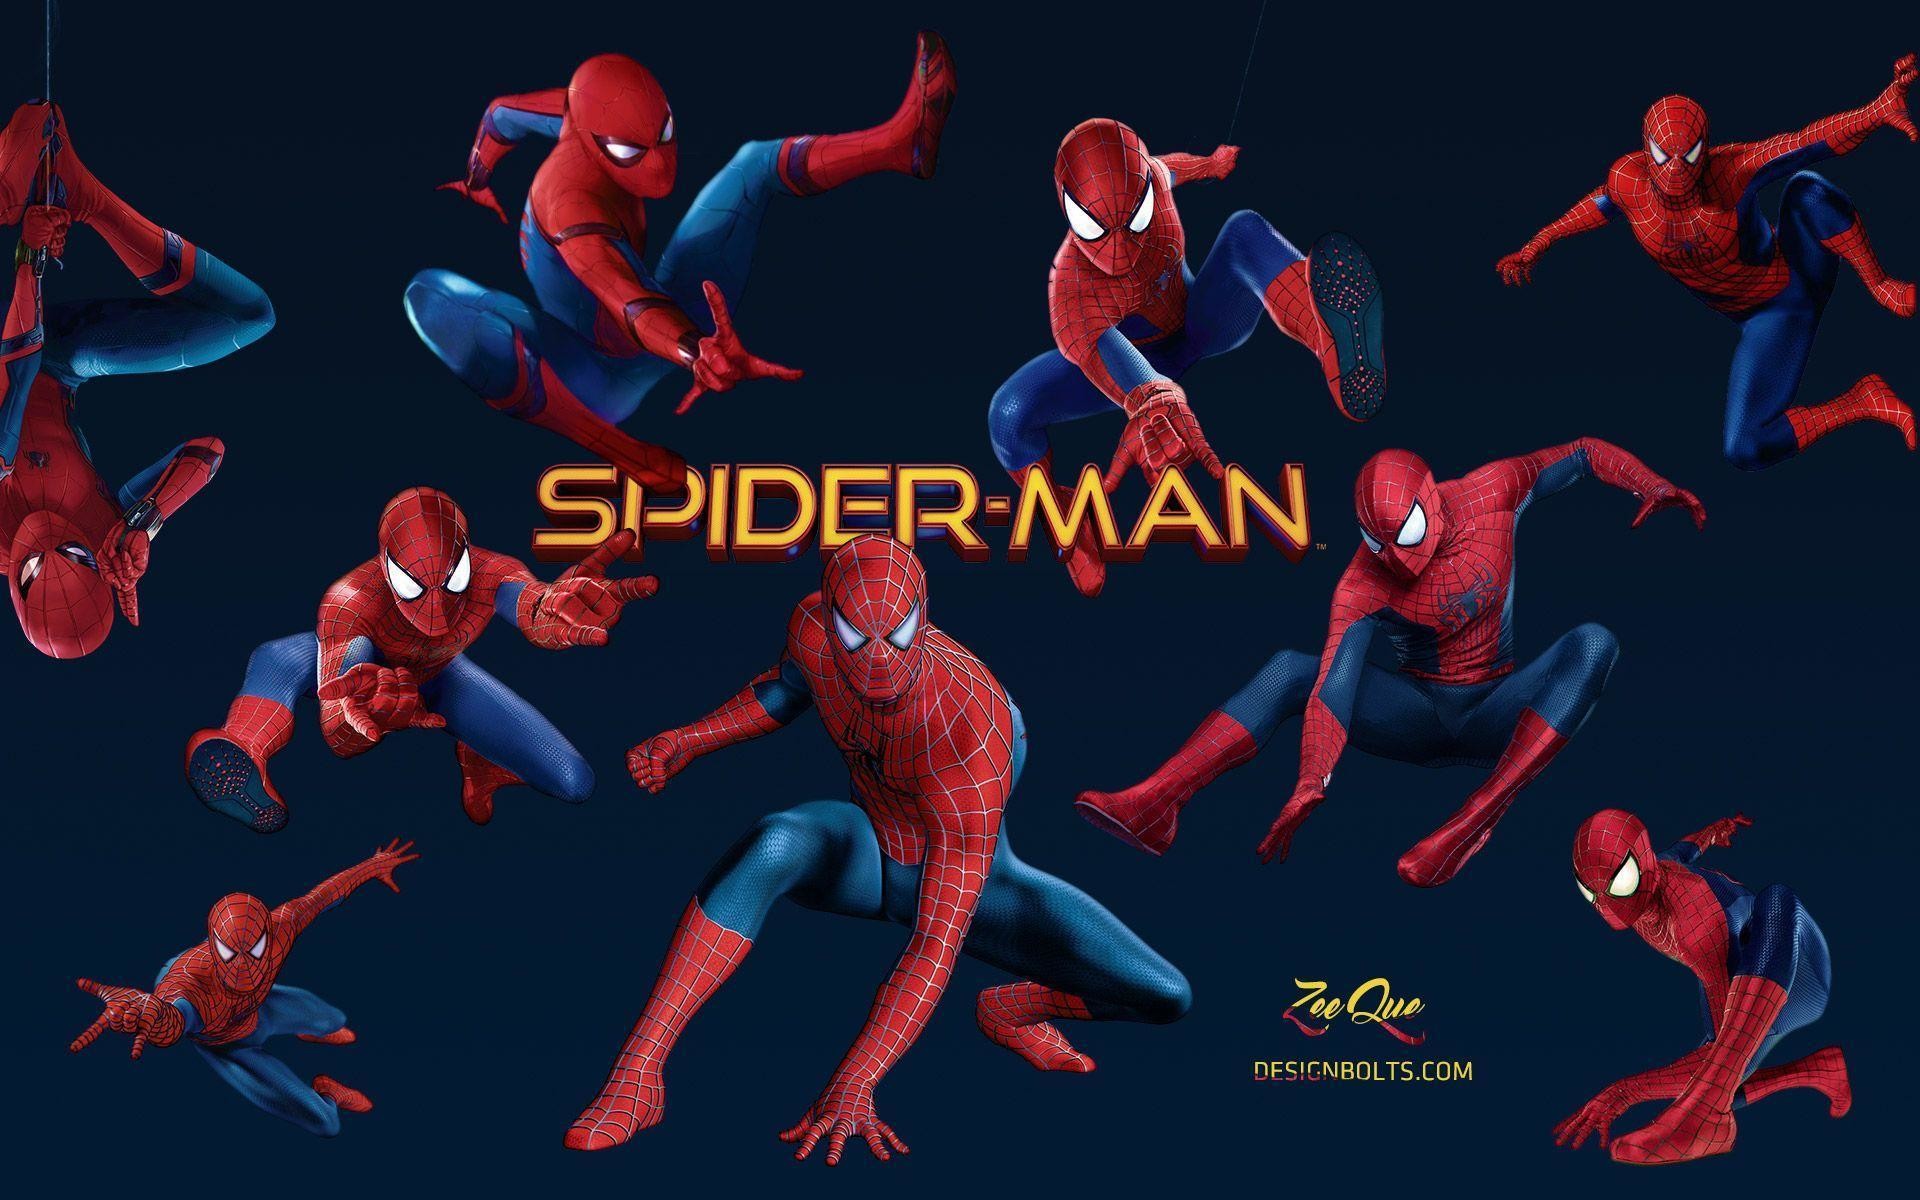 Spider-Man Homecoming (English) Watch Online 720p